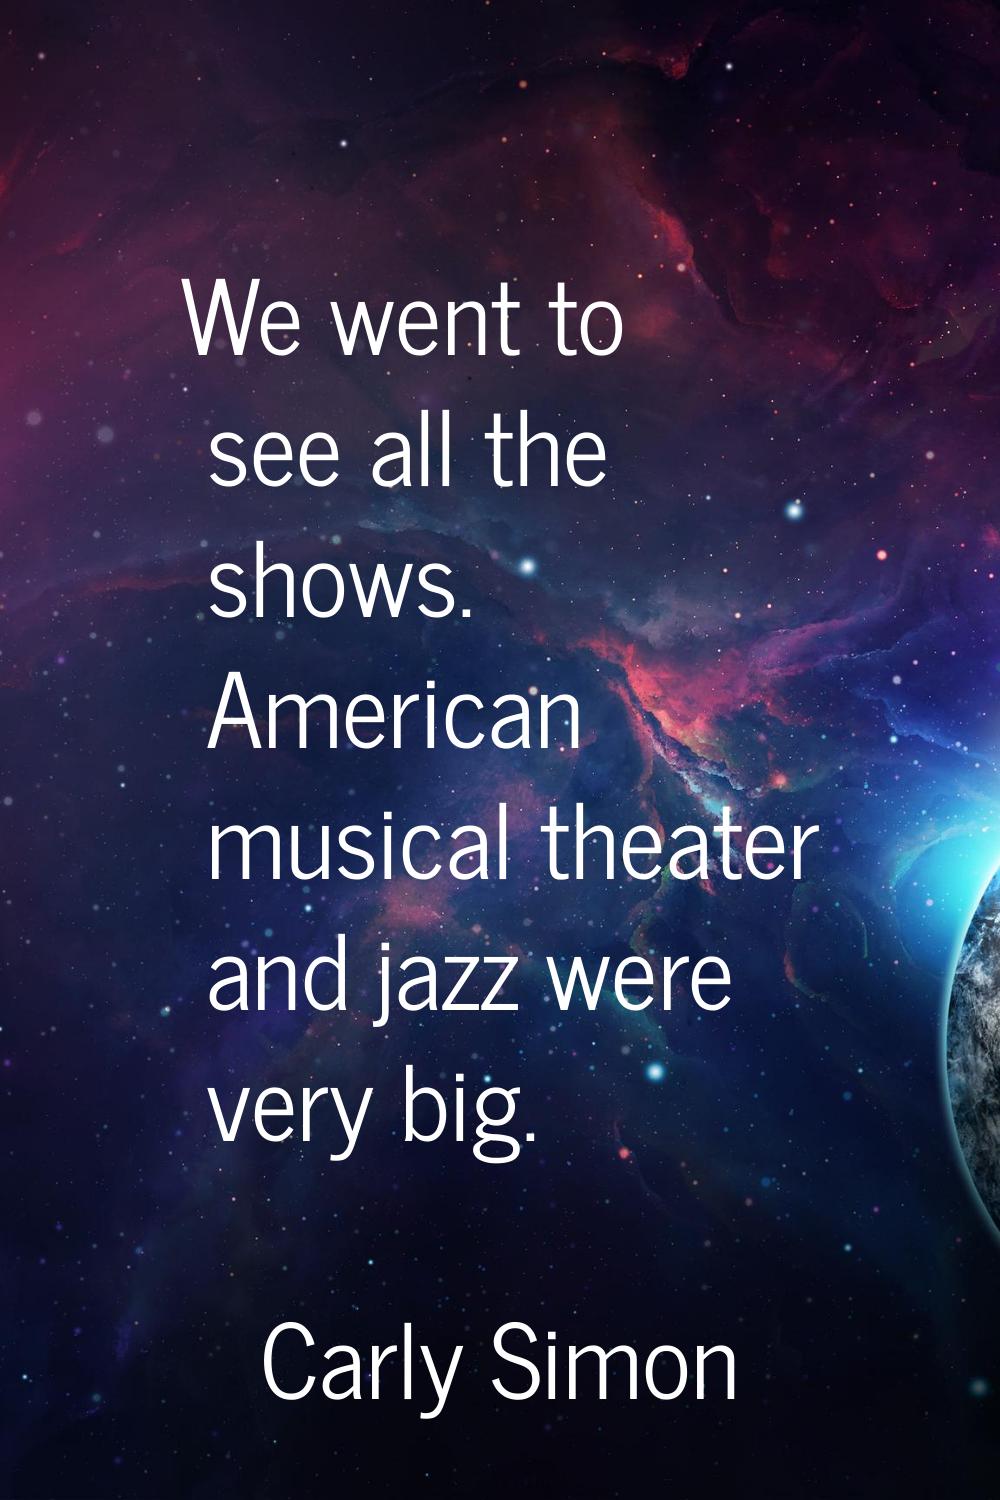 We went to see all the shows. American musical theater and jazz were very big.